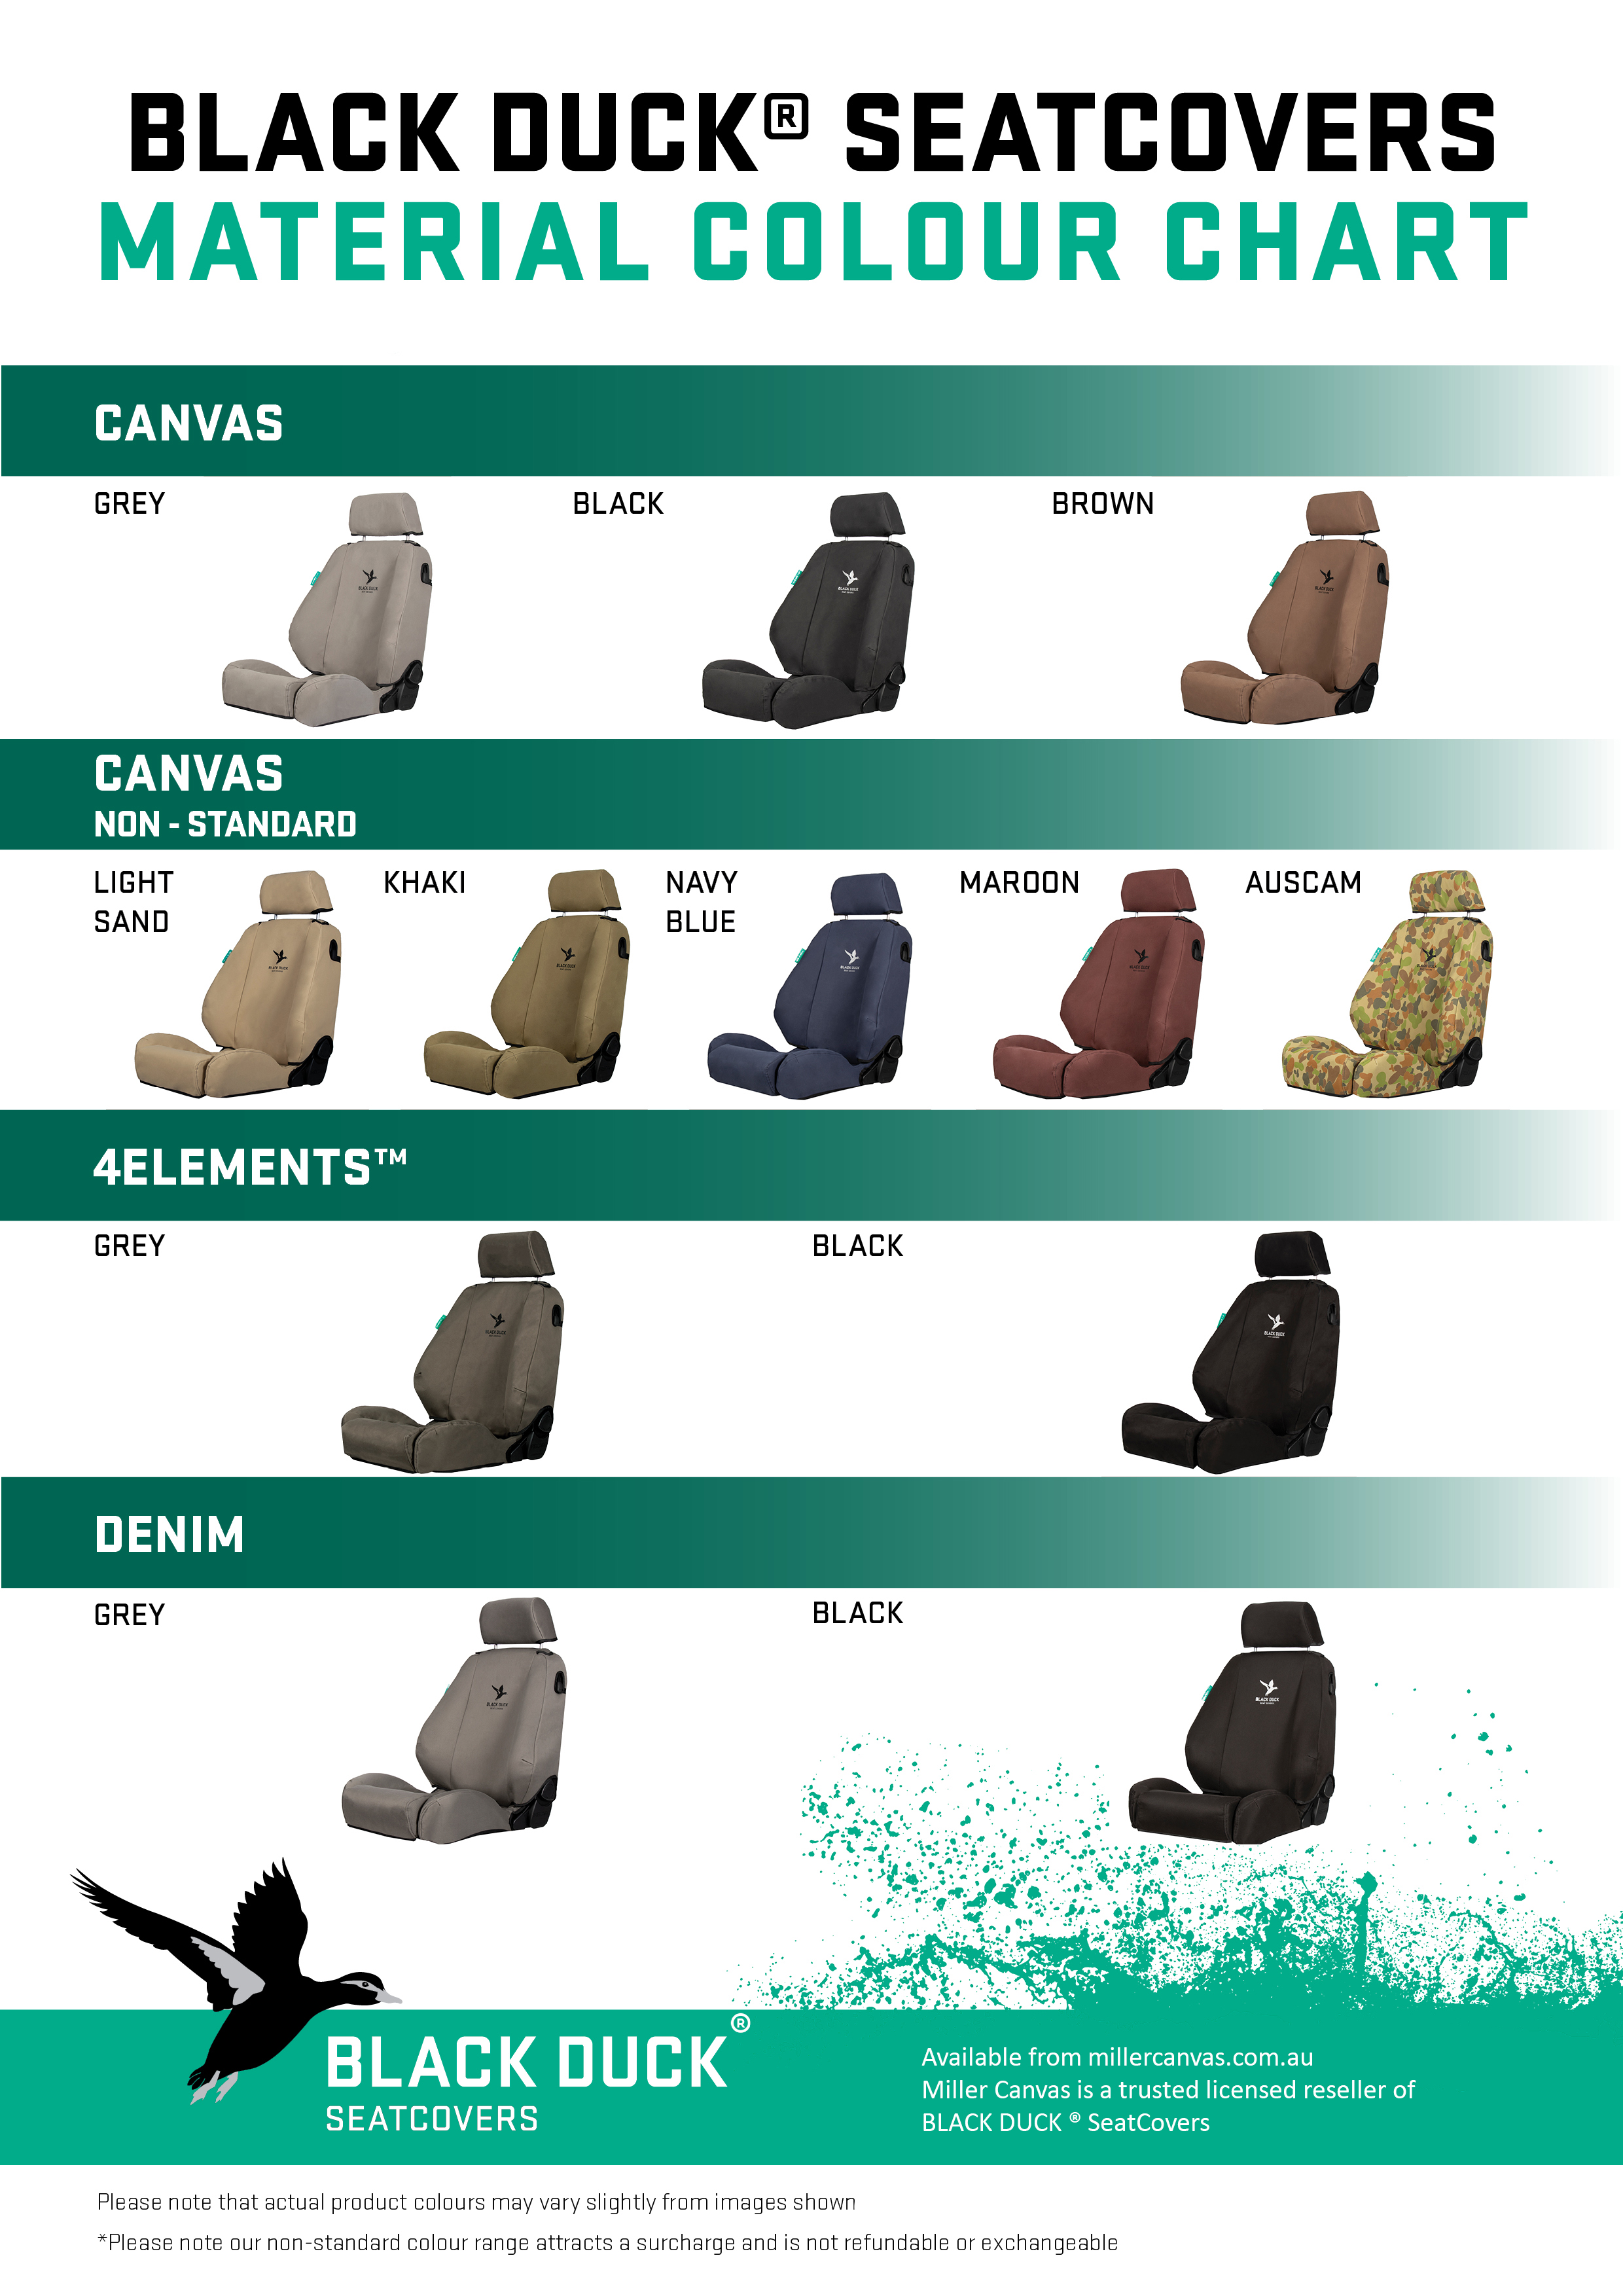 Black Duck Seat Covers - Colours.